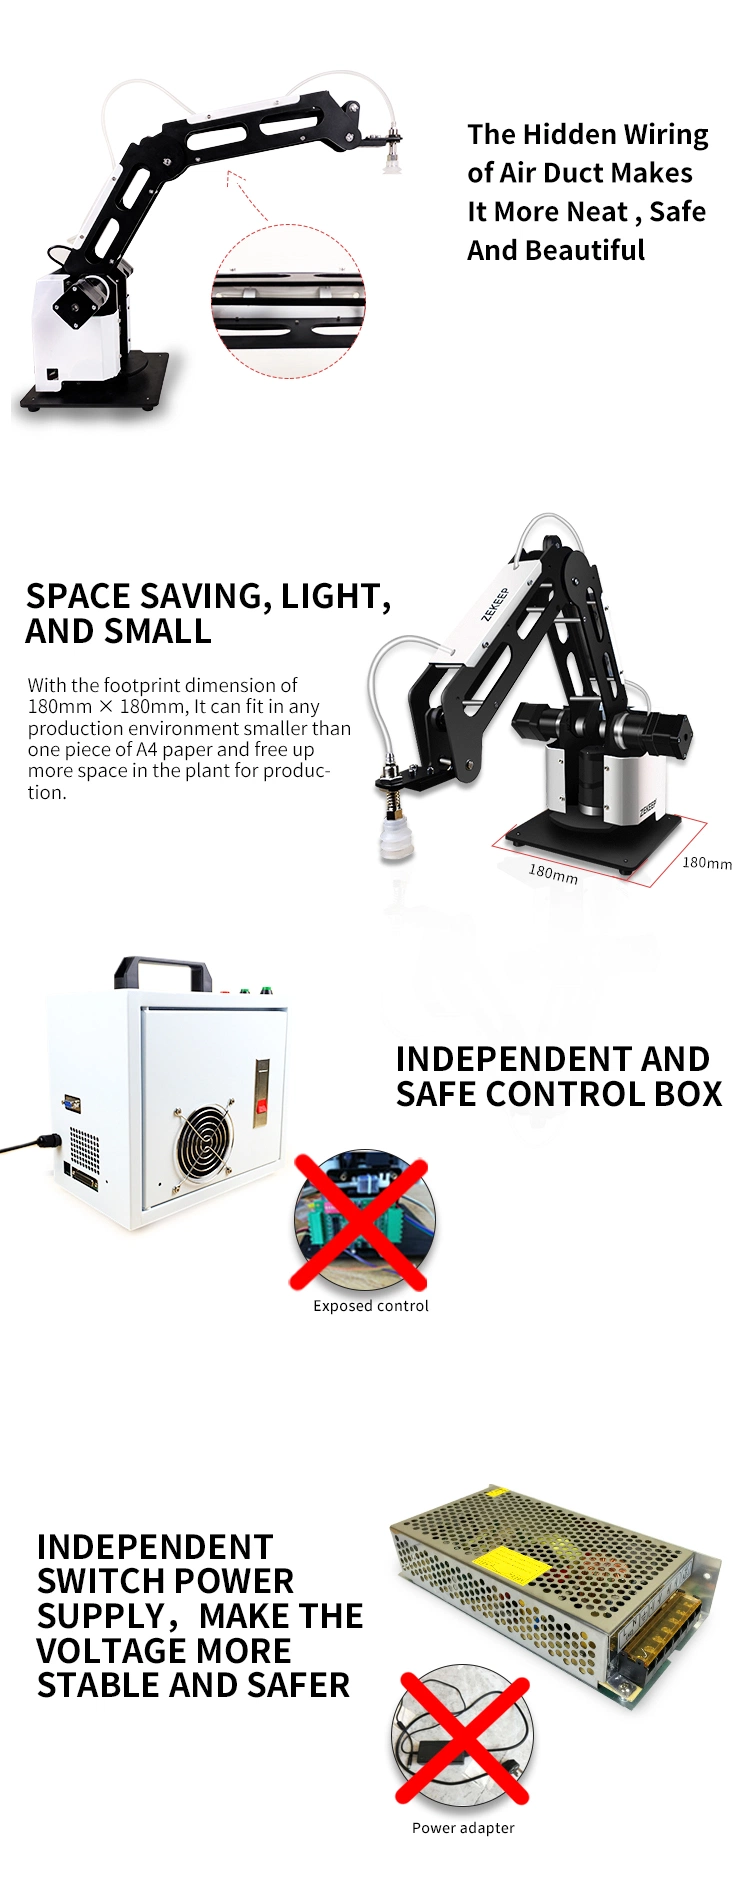 301ED Provide a PLC Fully Open Source Fully Automatic Robotic Manipulator for University Teaching